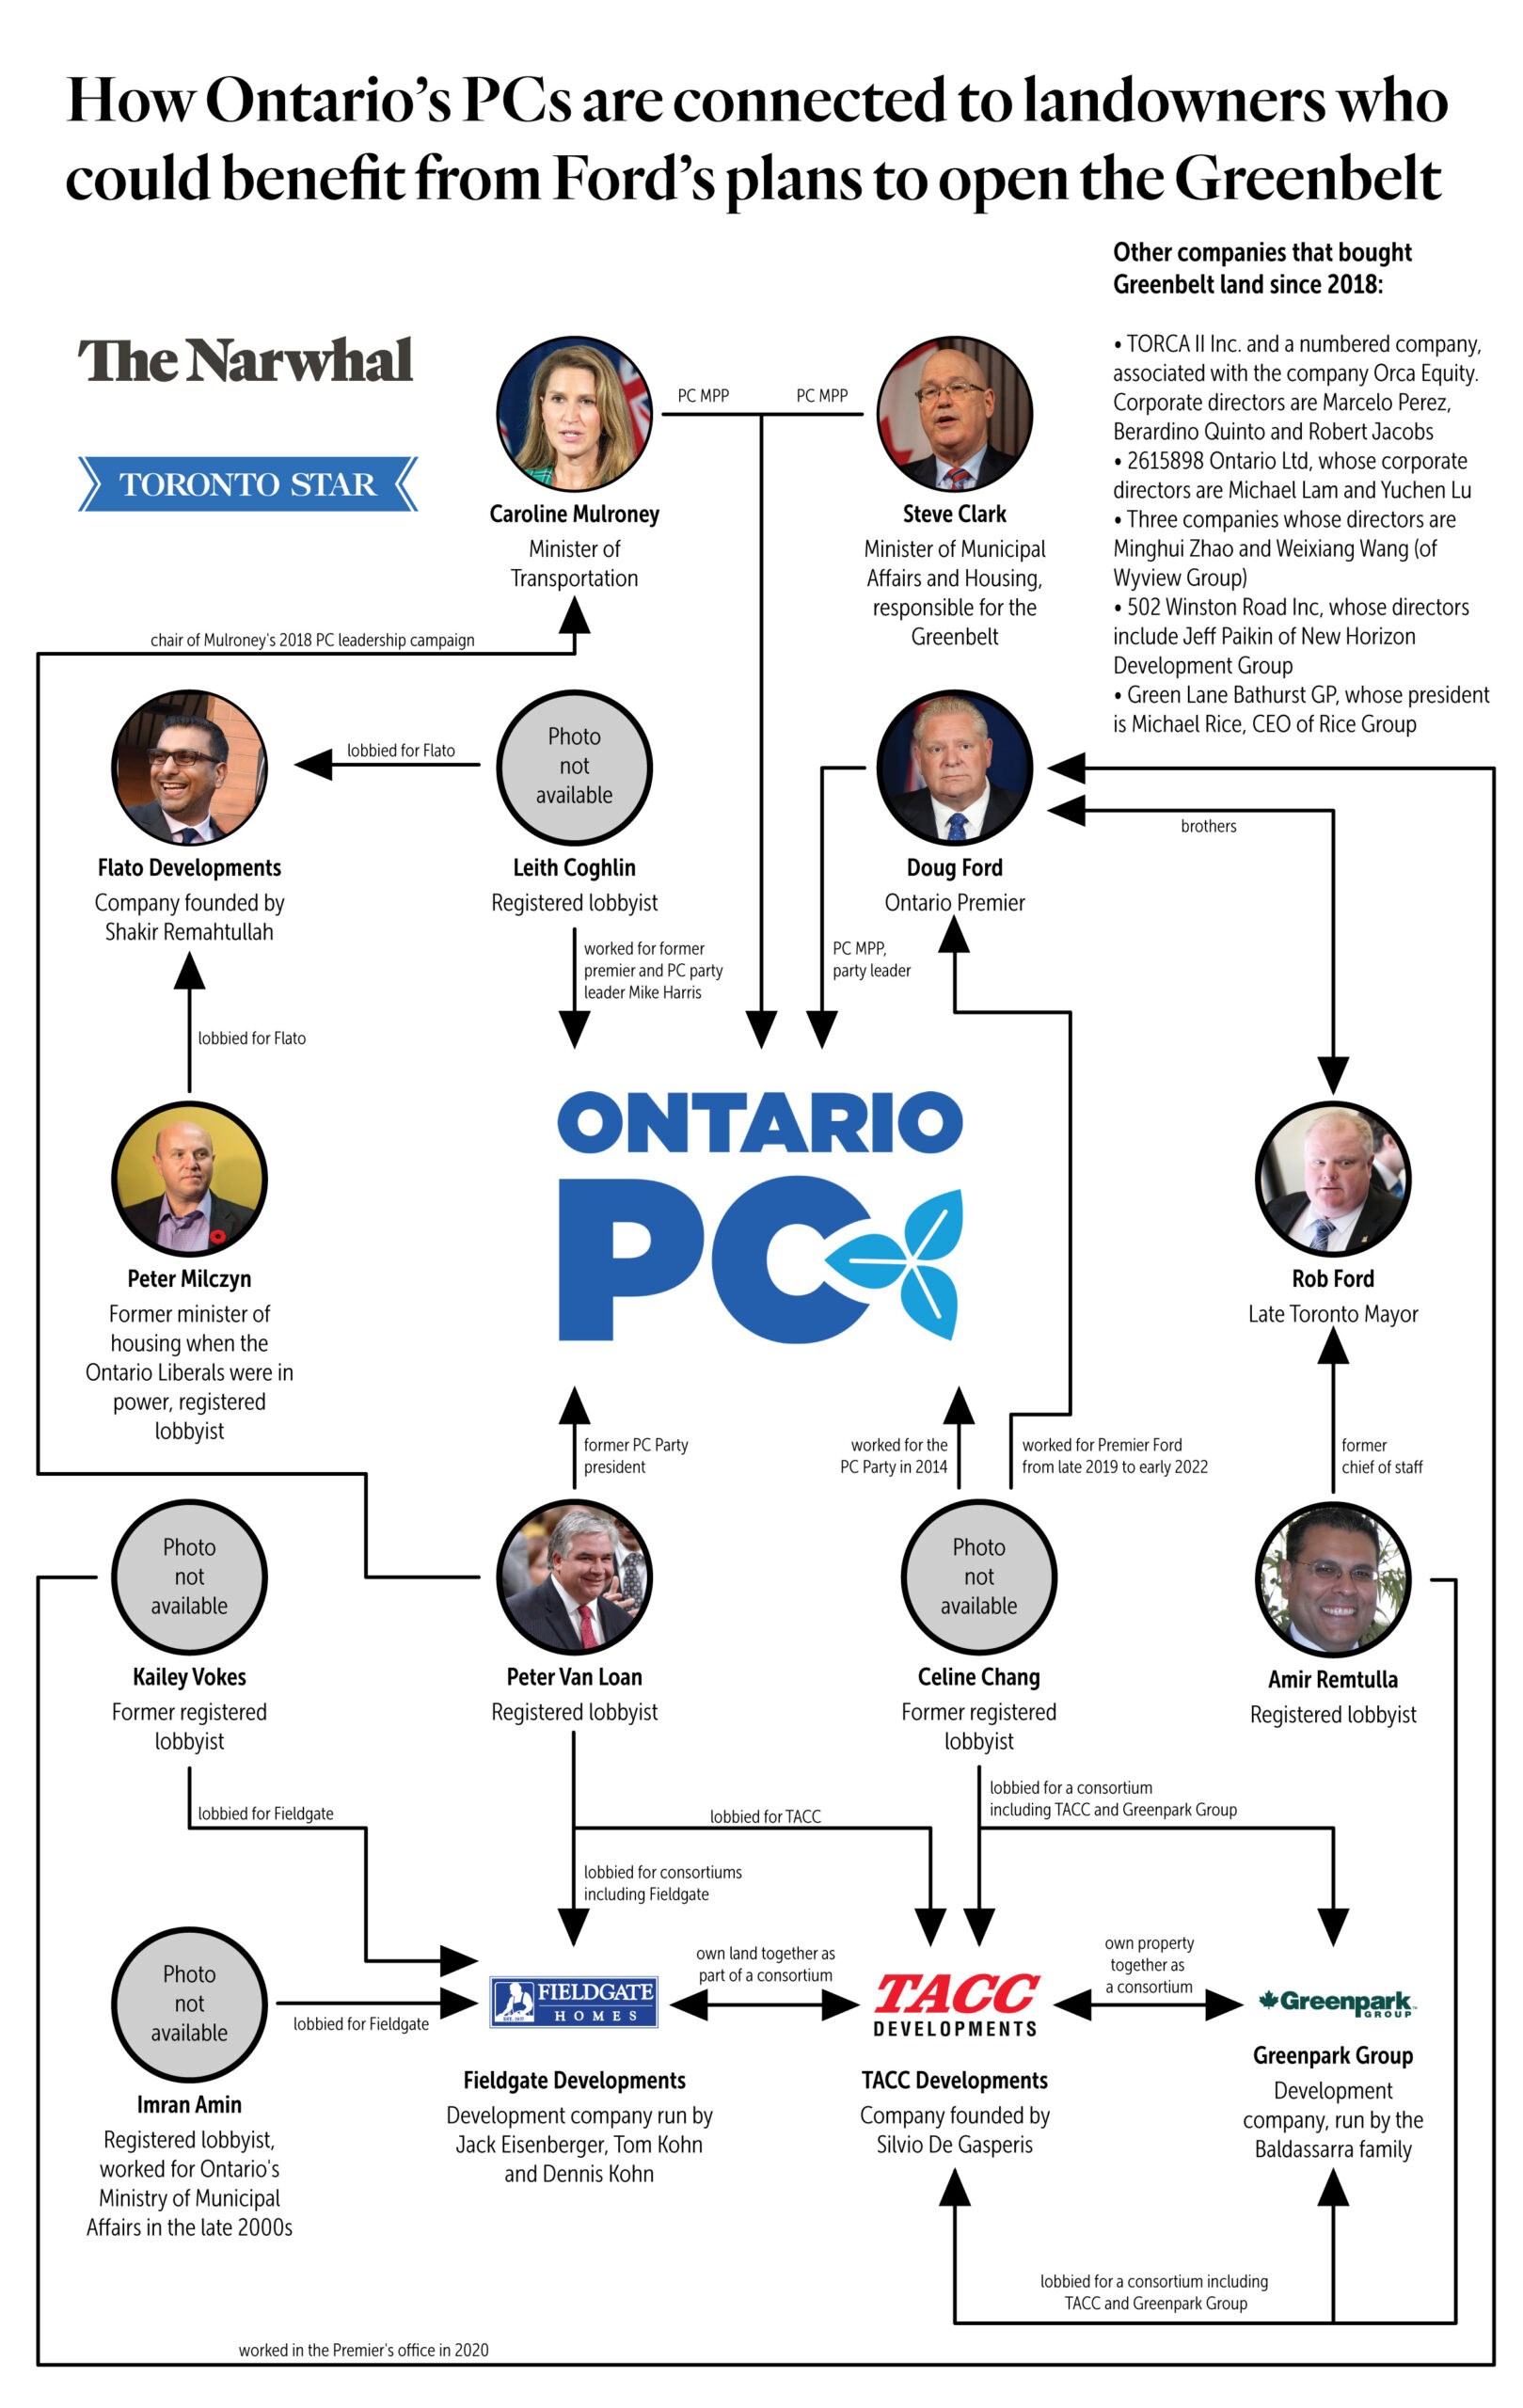 A graphic showing connections between Doug Ford, the Progressive Conservative Party, lobbyists and developers